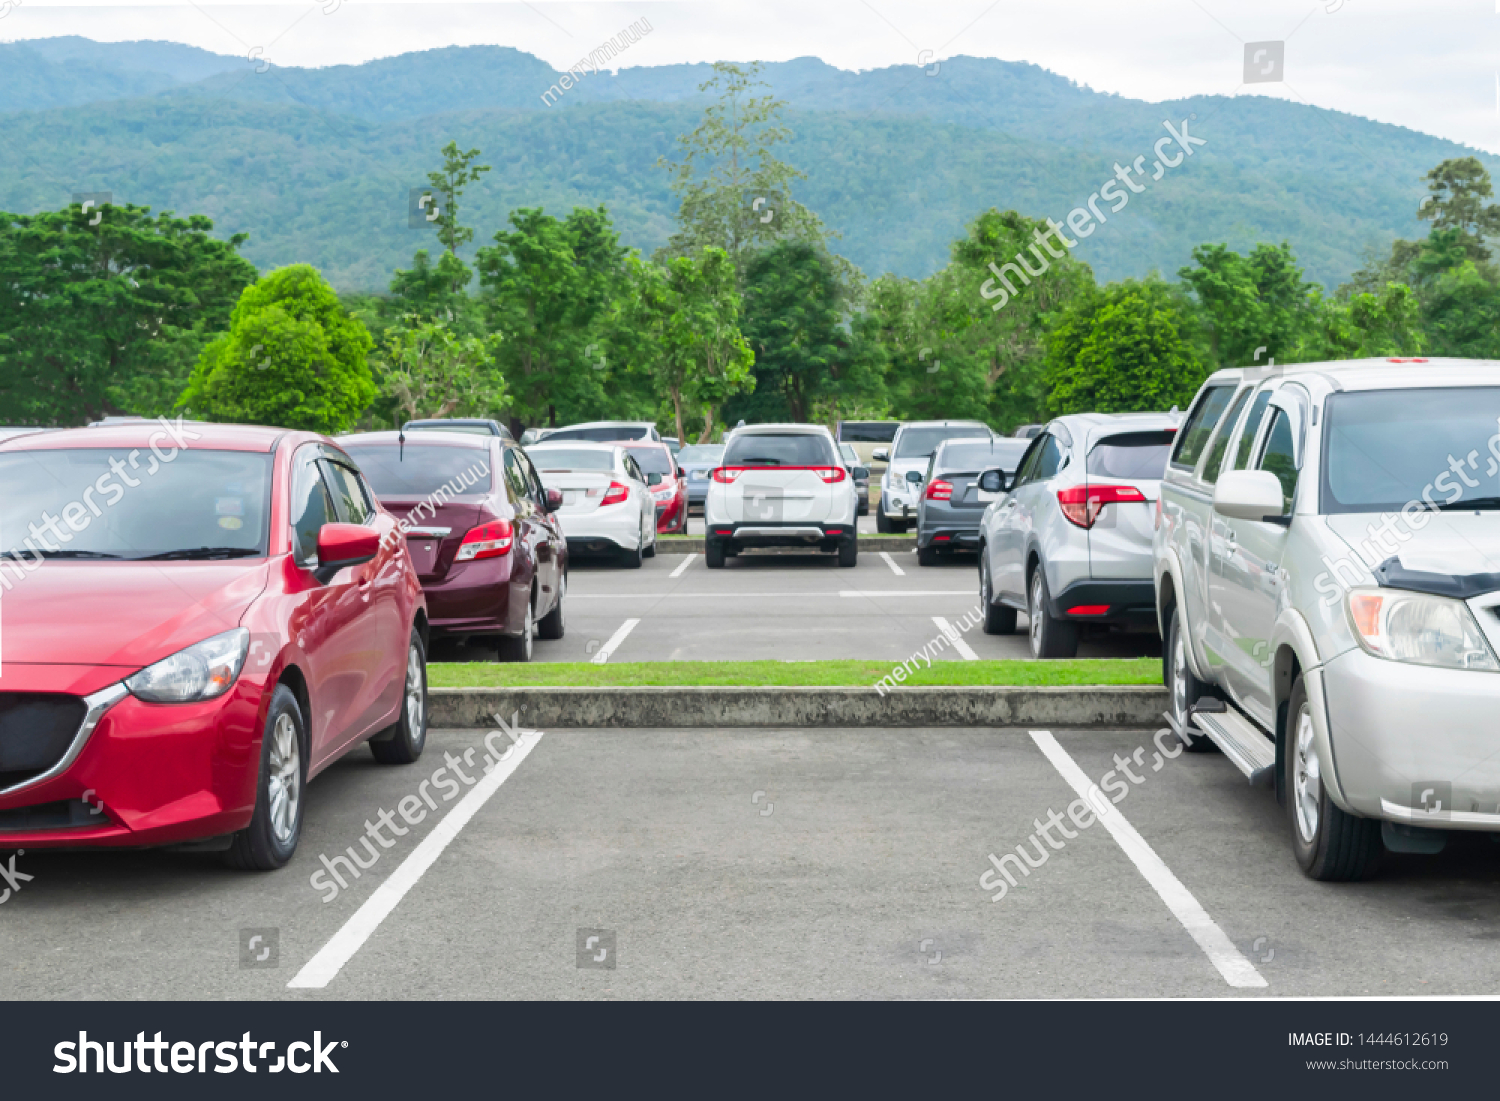 Car parked in asphalt parking lot and empty space parking  in nature with trees and mountain background .Outdoor parking lot with fresh ozone and eco friendly green environment concept
 #1444612619